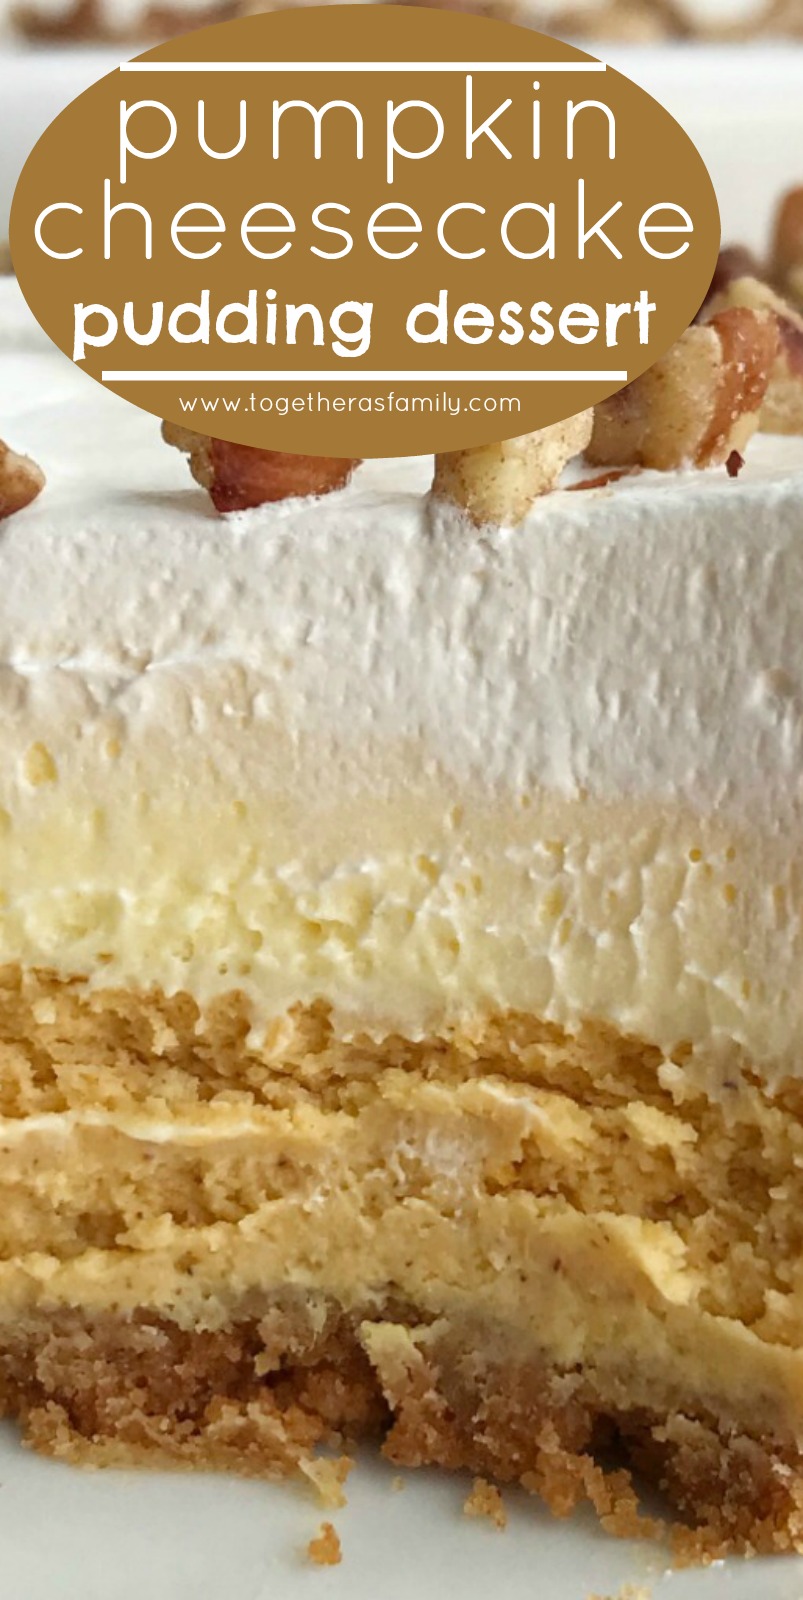 Pumpkin Cheesecake Layered Pudding Dessert | Pumpkin Dessert Recipe | Fall Baking | Pumpkin Recipes | Pumpkin cheesecake pudding dessert is a layered dessert made in a 9x13 baking dish. Cinnamon cracker crust, topped with a creamy pumpkin cheesecake, fluffy vanilla pudding, and Cool Whip. Garnish with pecans for the best pumpkin dessert this Fall. #pumpkin #pumpkinrecipes #cheesecake #dessertrecipe #fallbaking #recipeoftheday